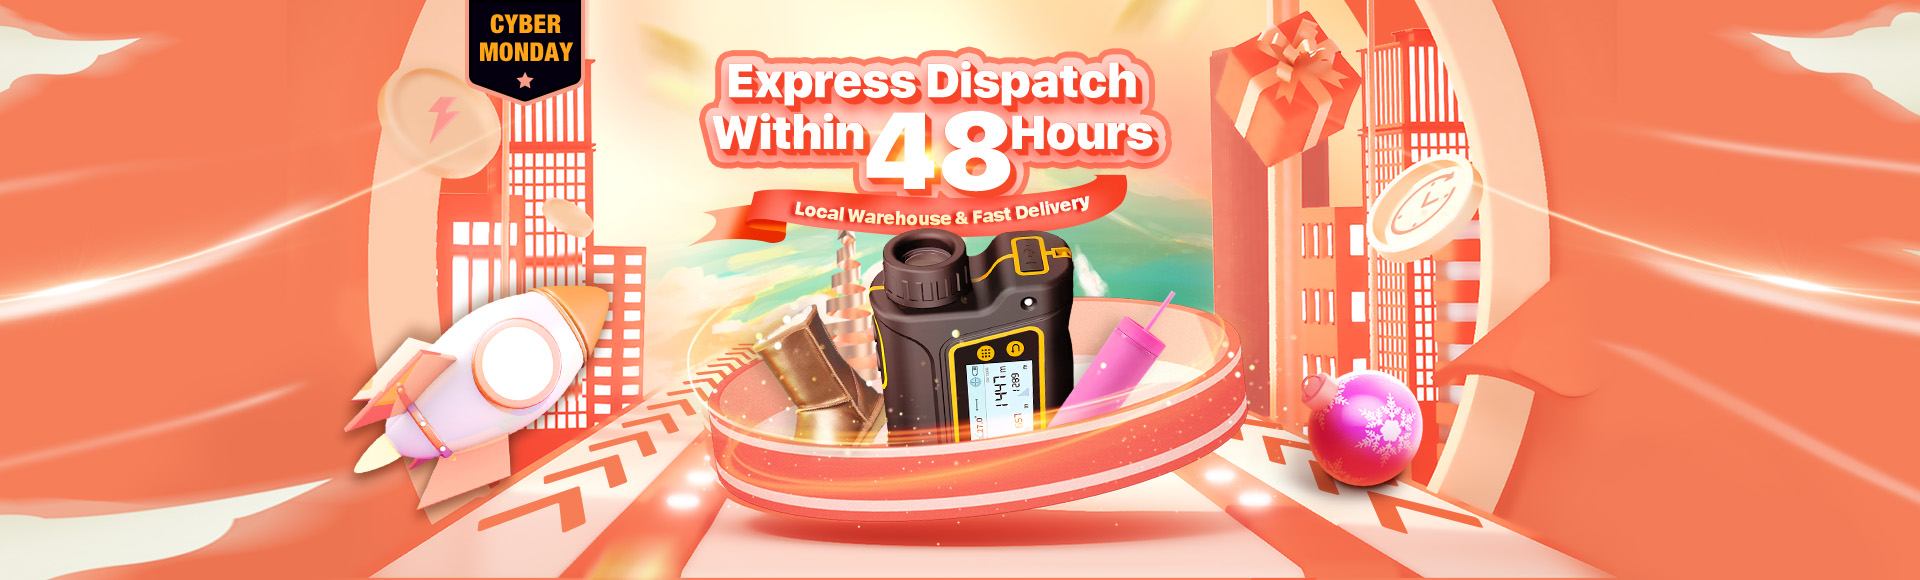 DHgate Express Dispatch Within 48 Hours